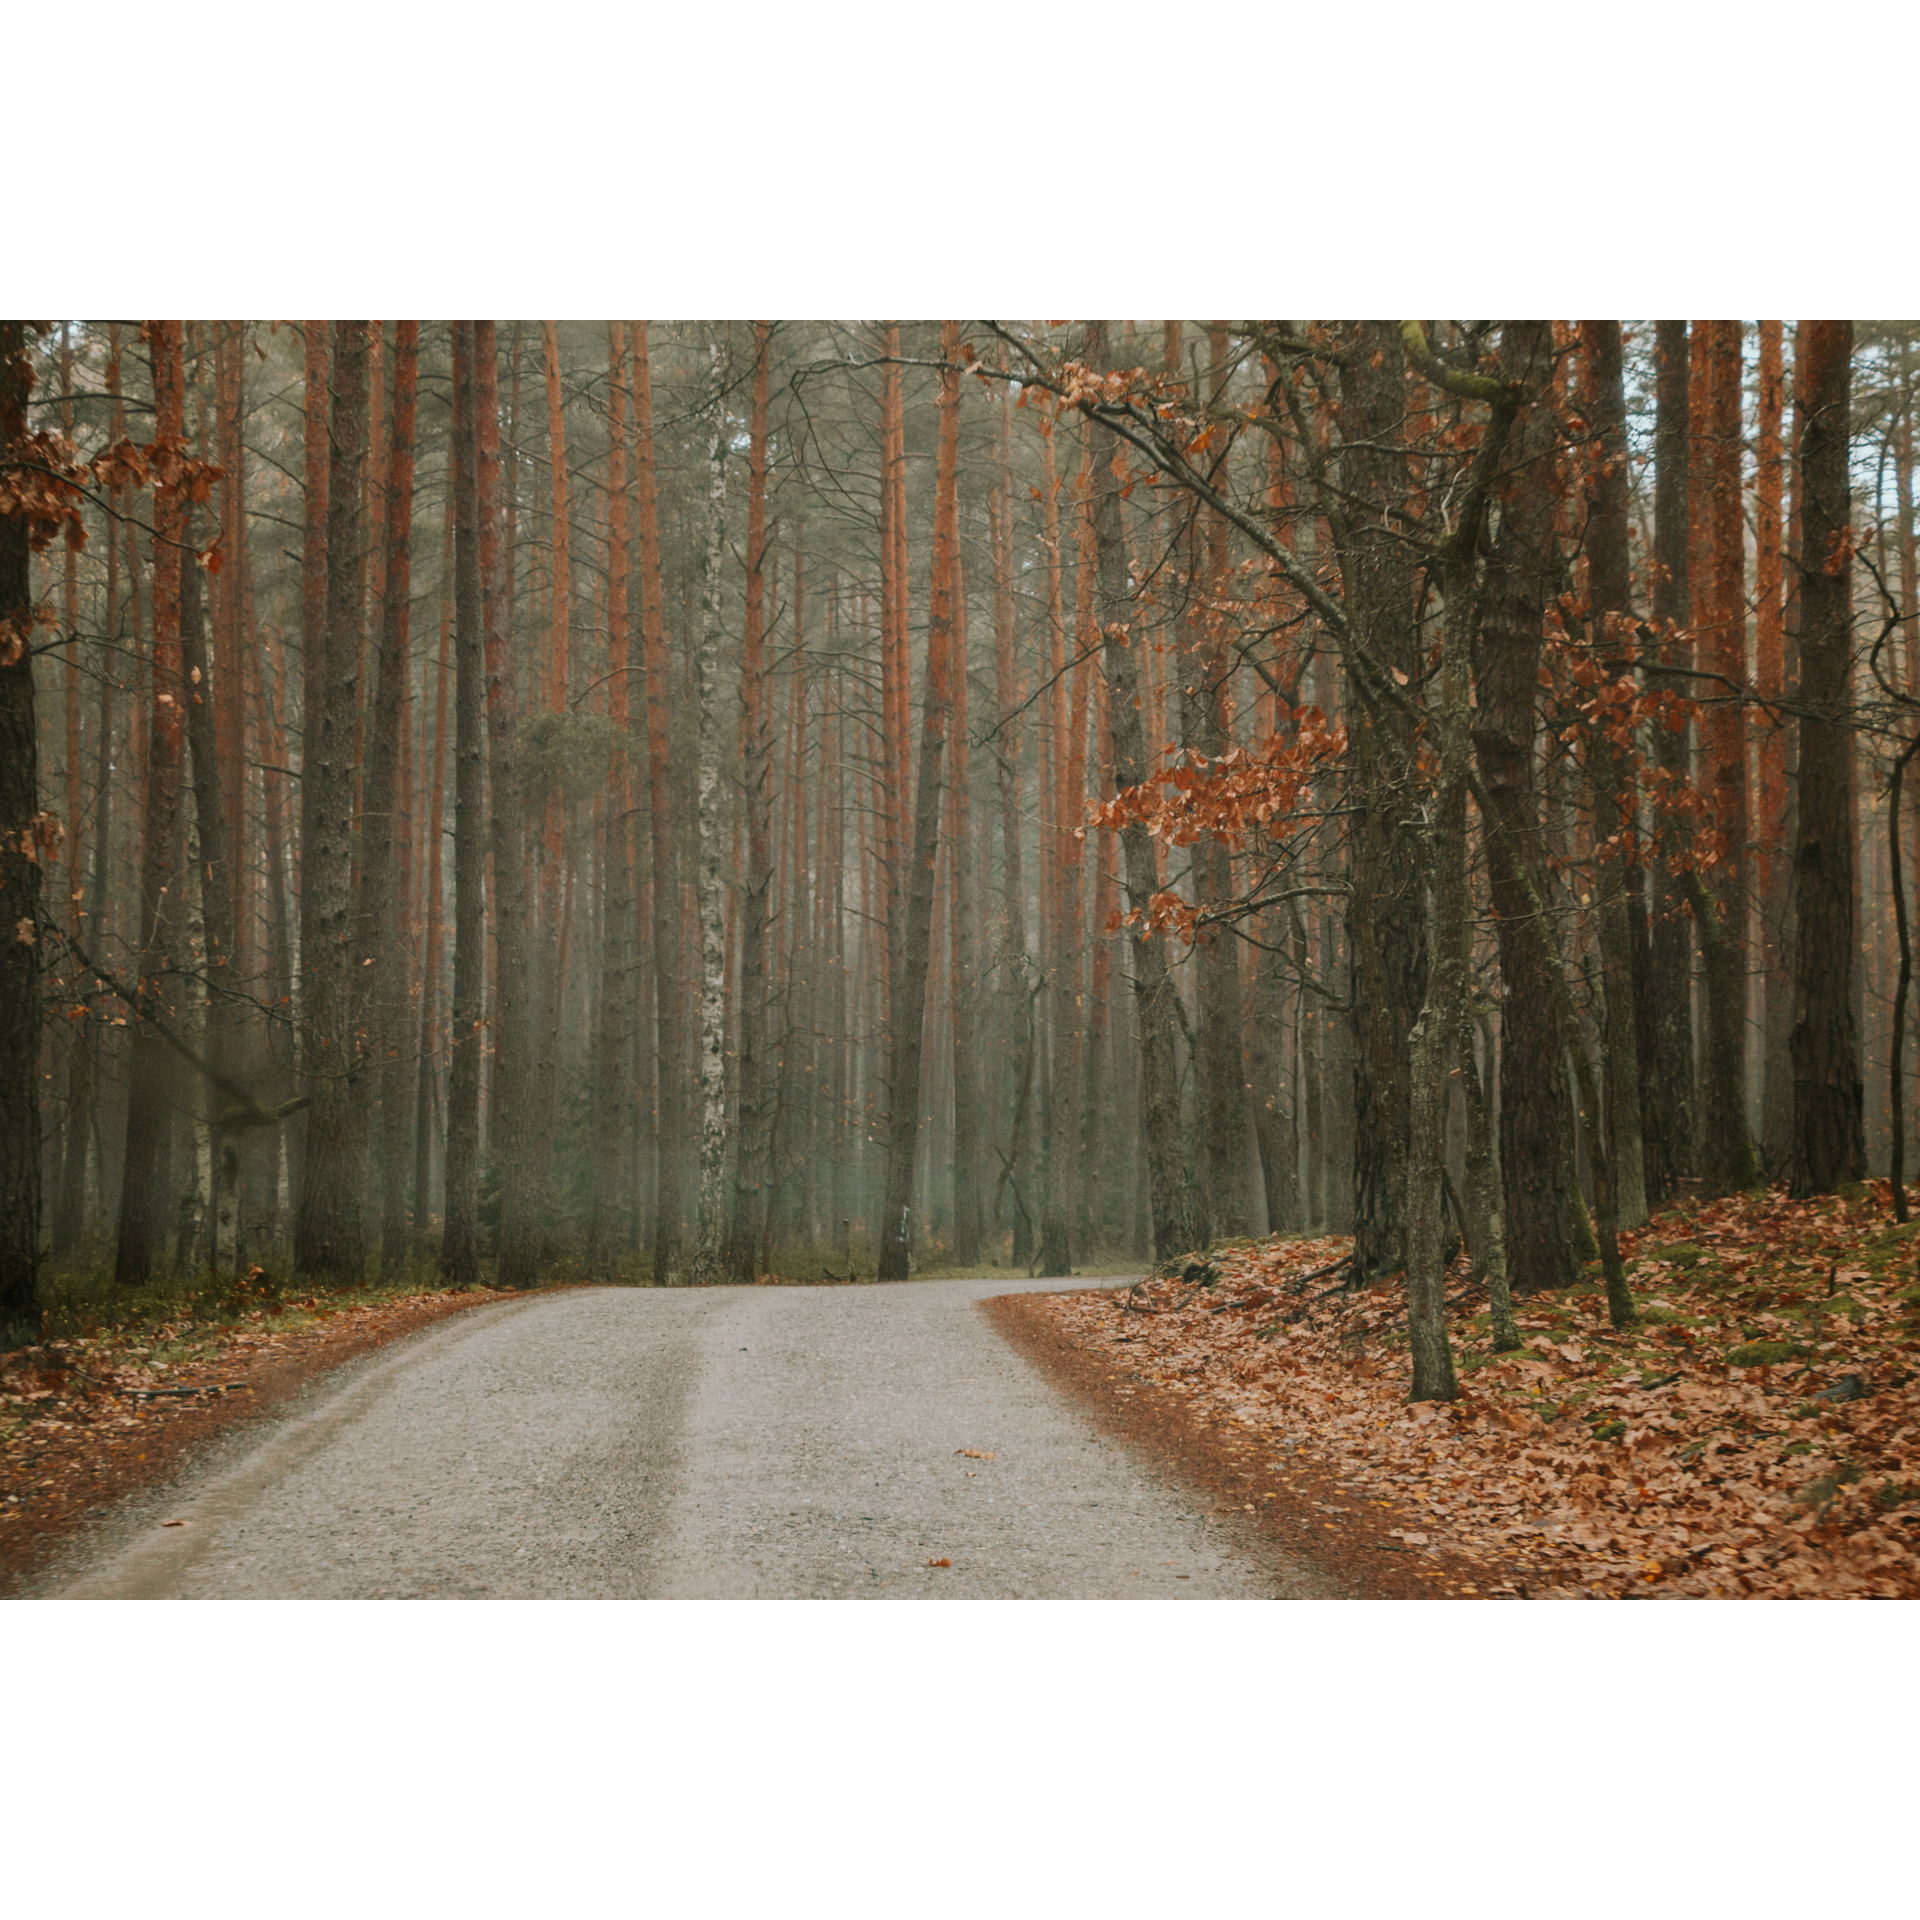 Paved road leading through the autumn forest with orange leaves on the roadsides